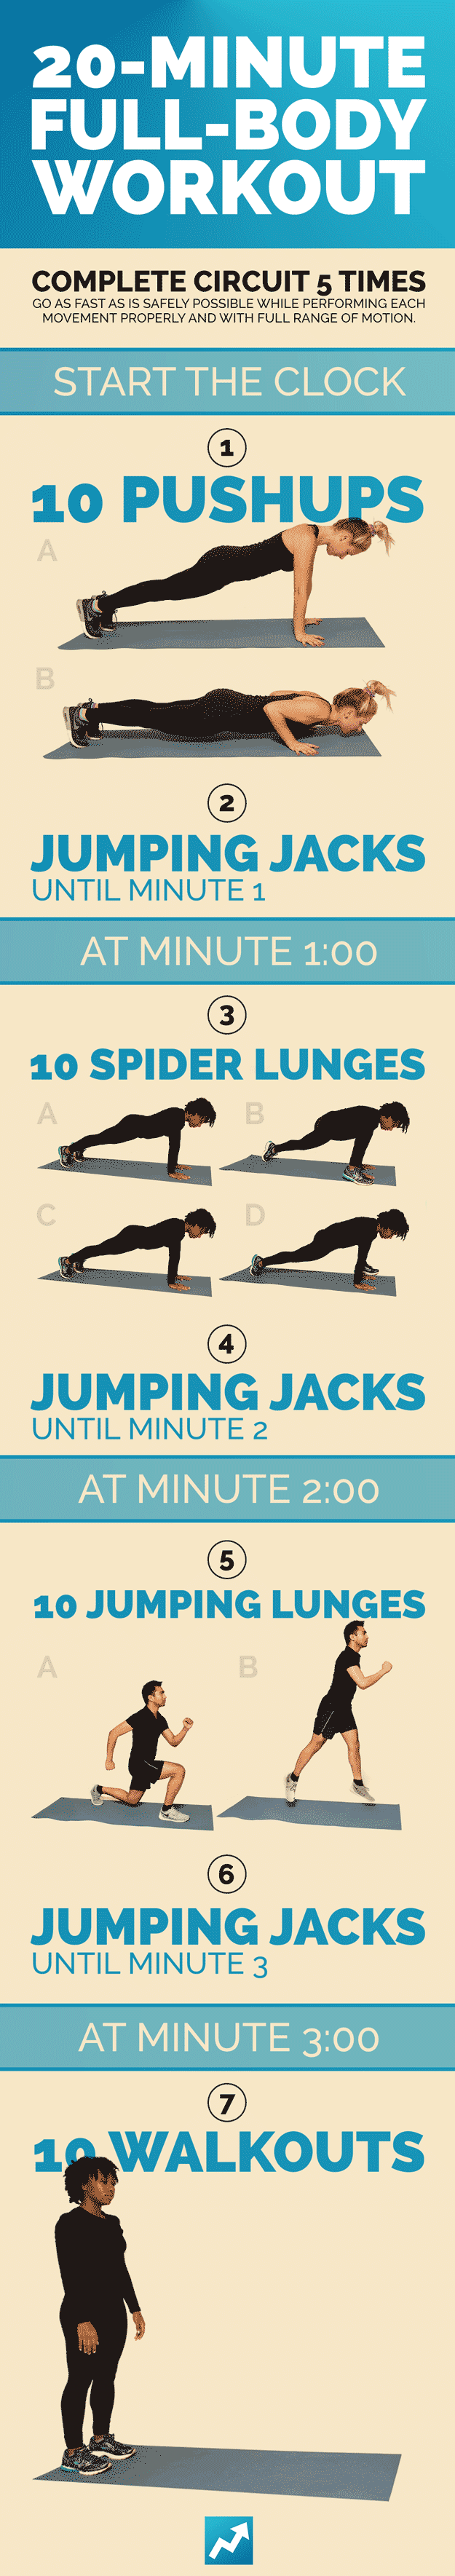 20-Minute Whole Body Toning Workout